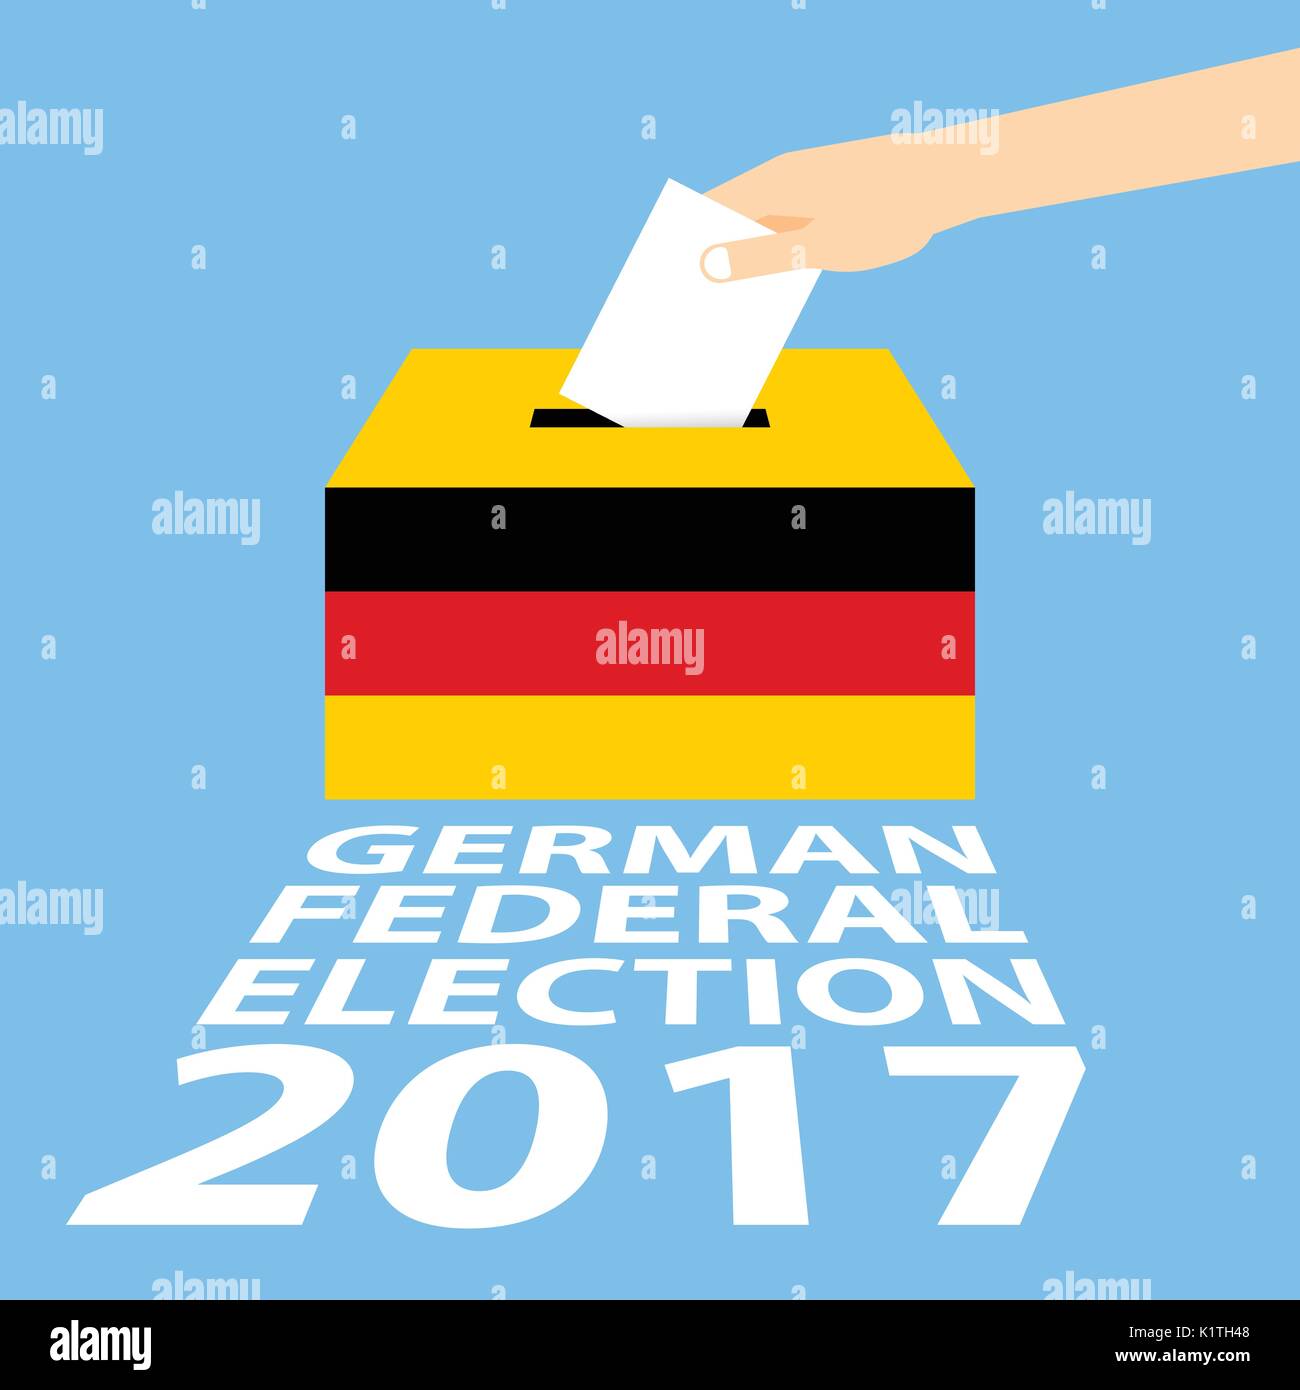 German Federal Election 2017 Vector Illustration Flat Style - Hand Putting Voting Paper in the Ballot Box Stock Vector